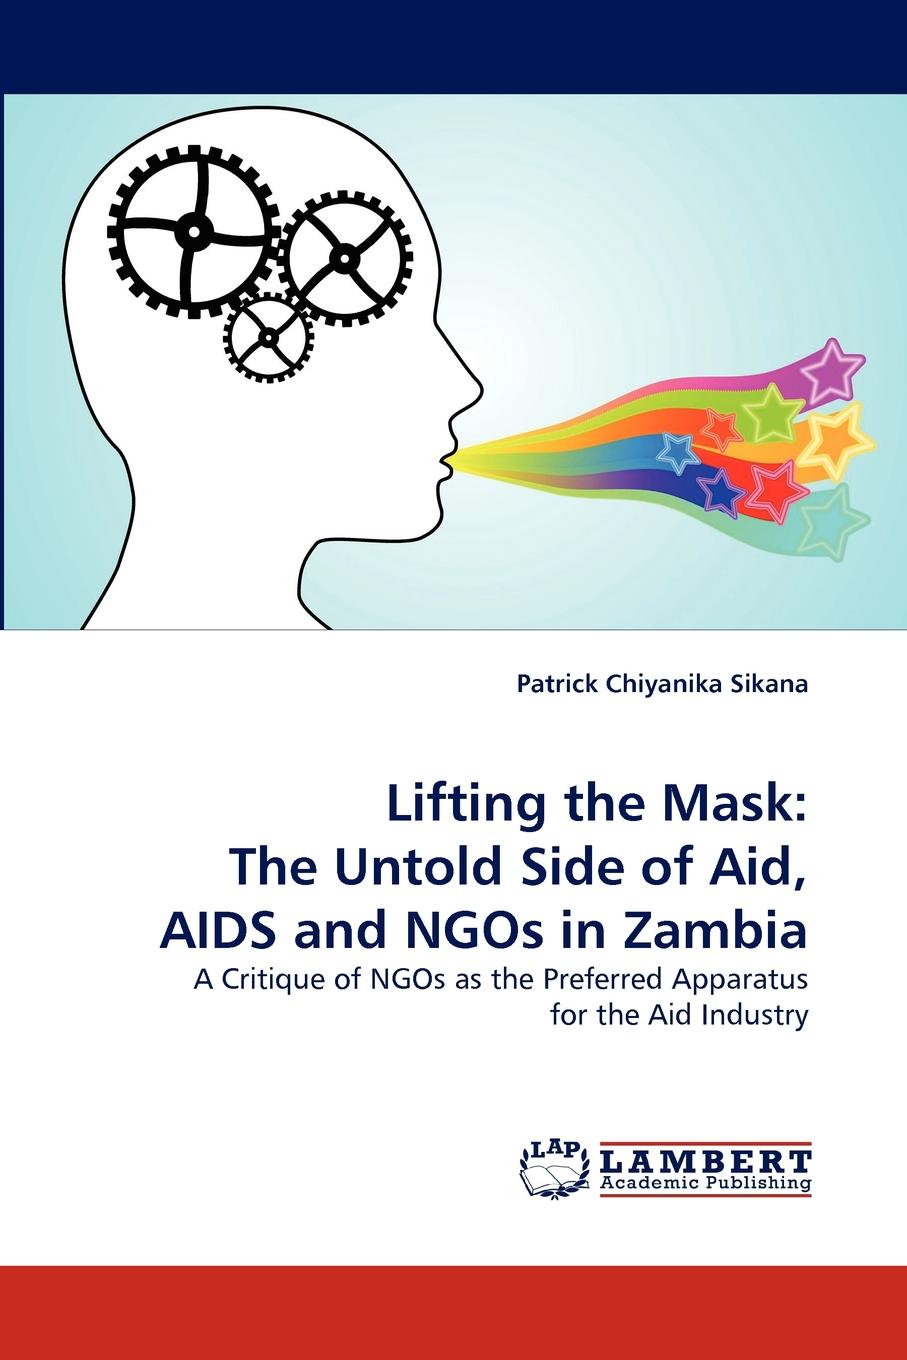 фото Lifting the Mask. The Untold Side of Aid, AIDS and Ngos in Zambia